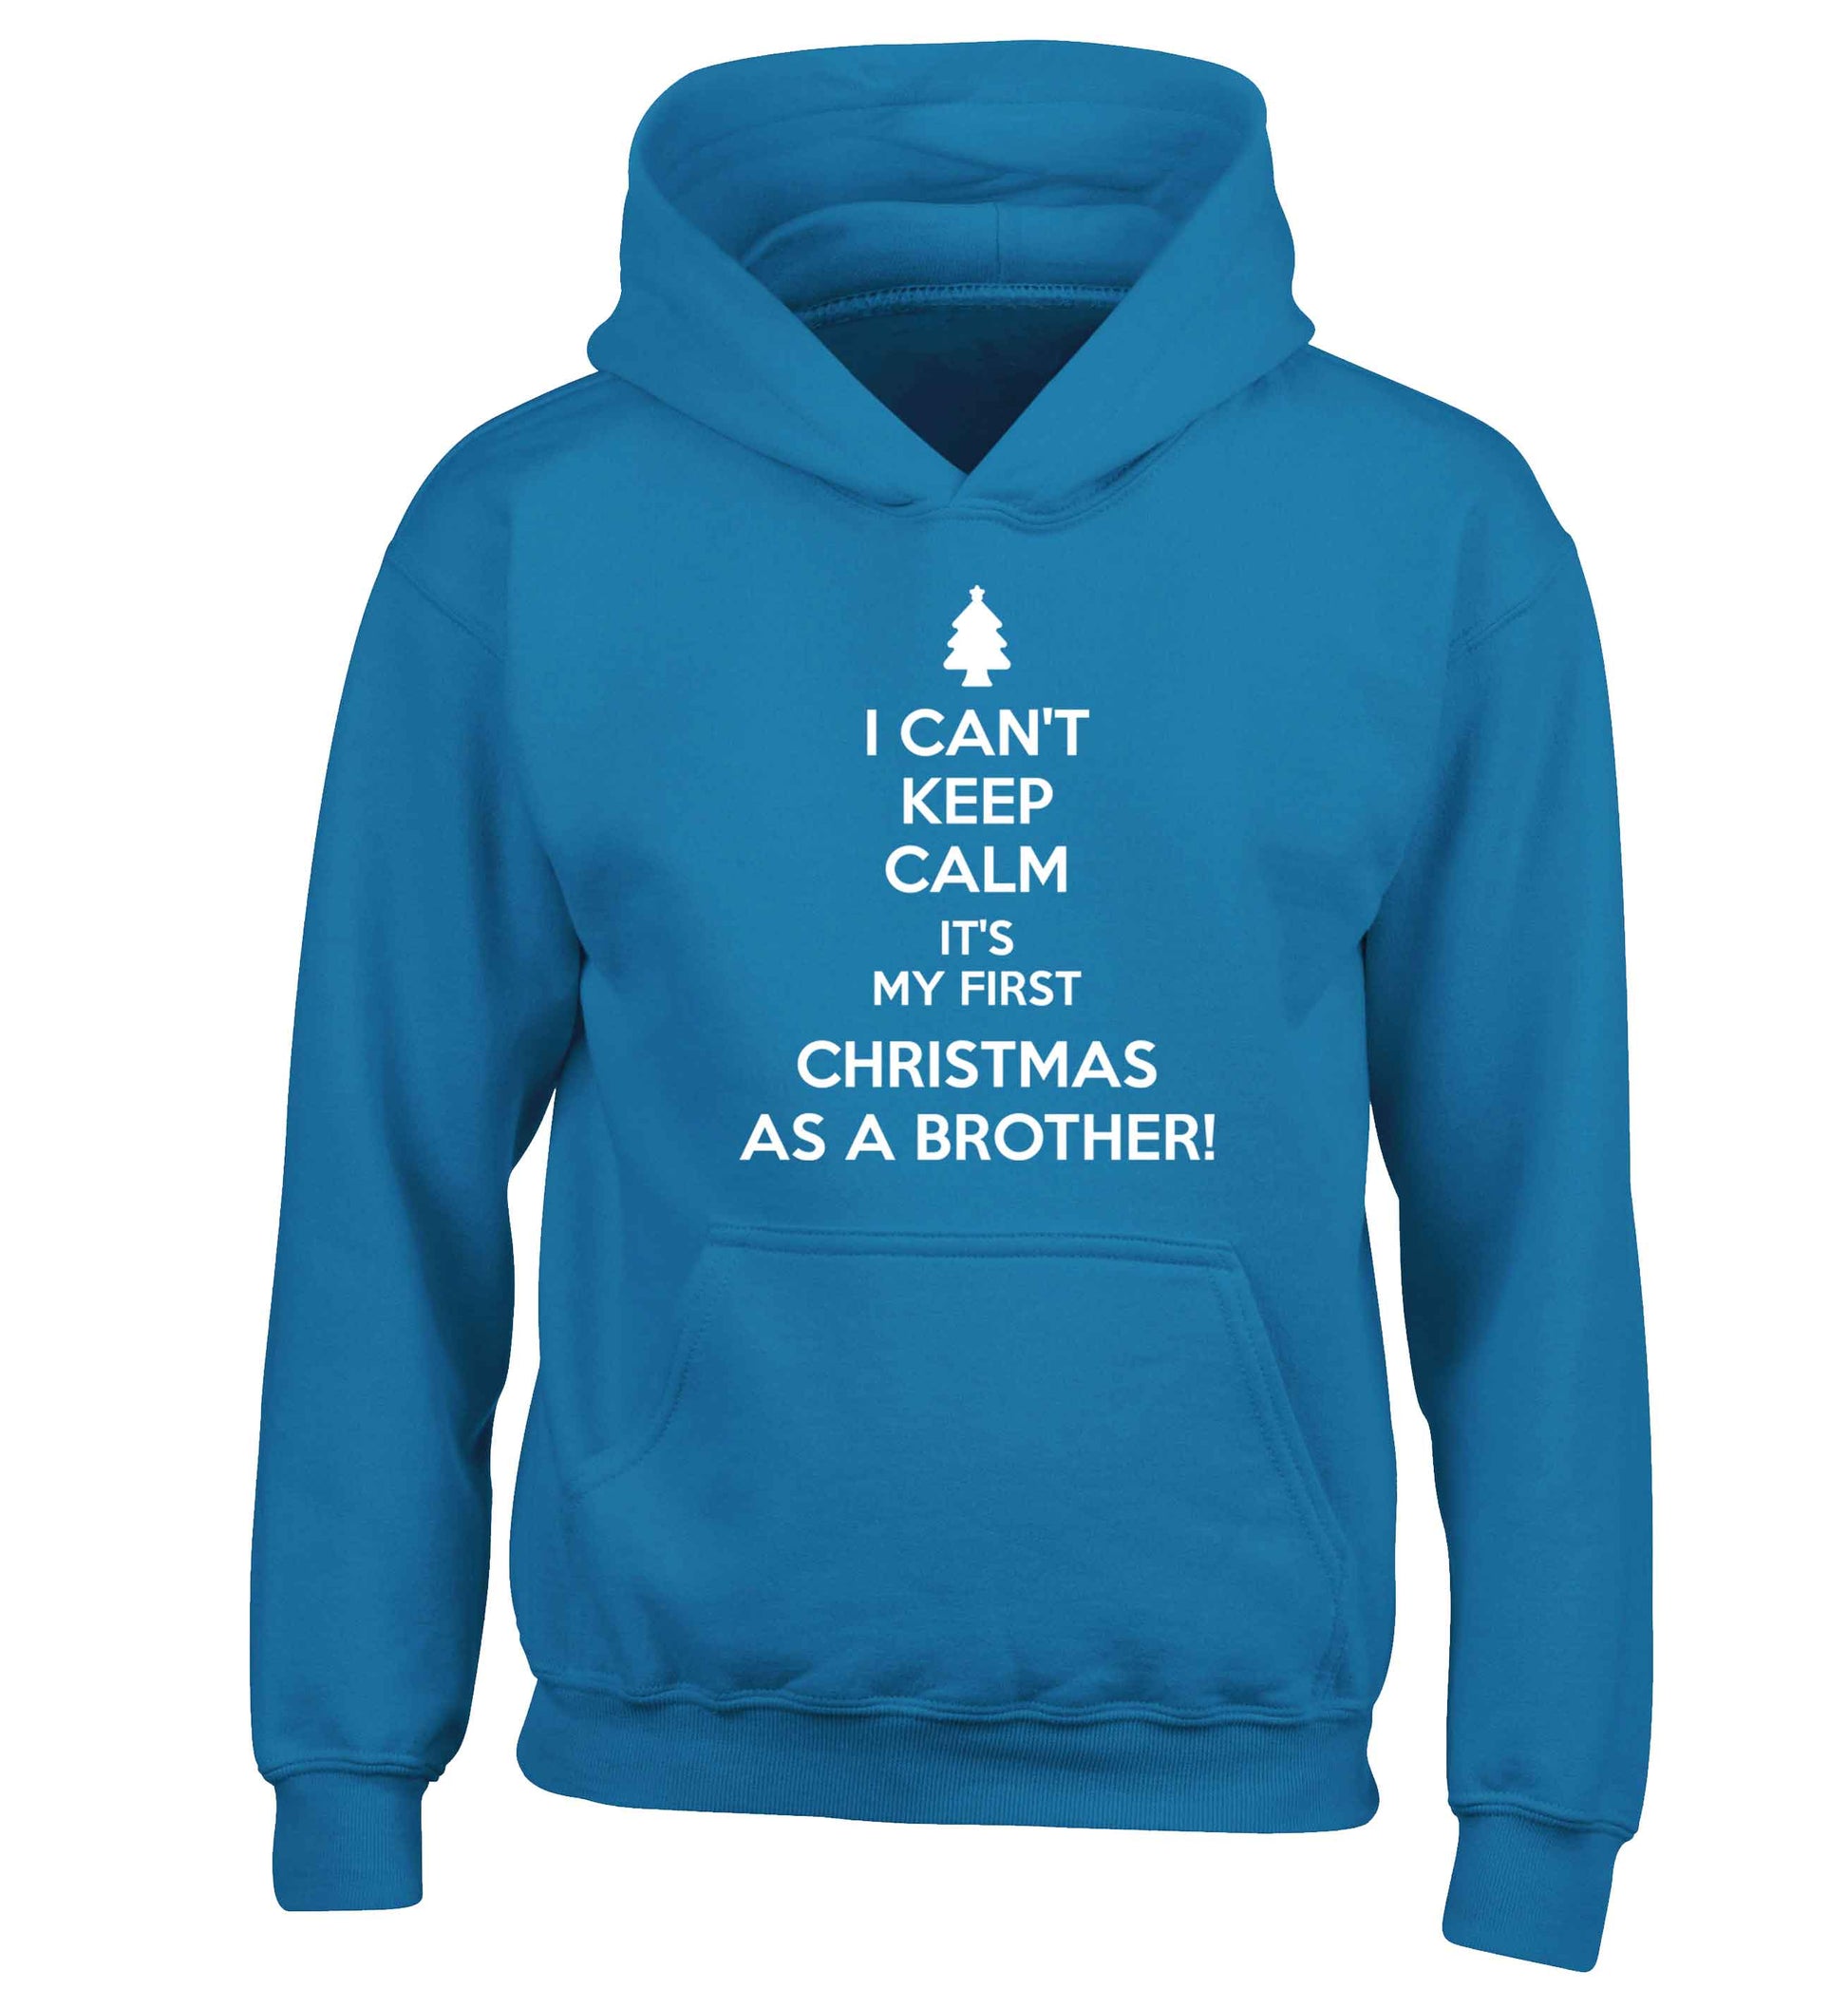 I can't keep calm it's my first Christmas as a brother! children's blue hoodie 12-13 Years